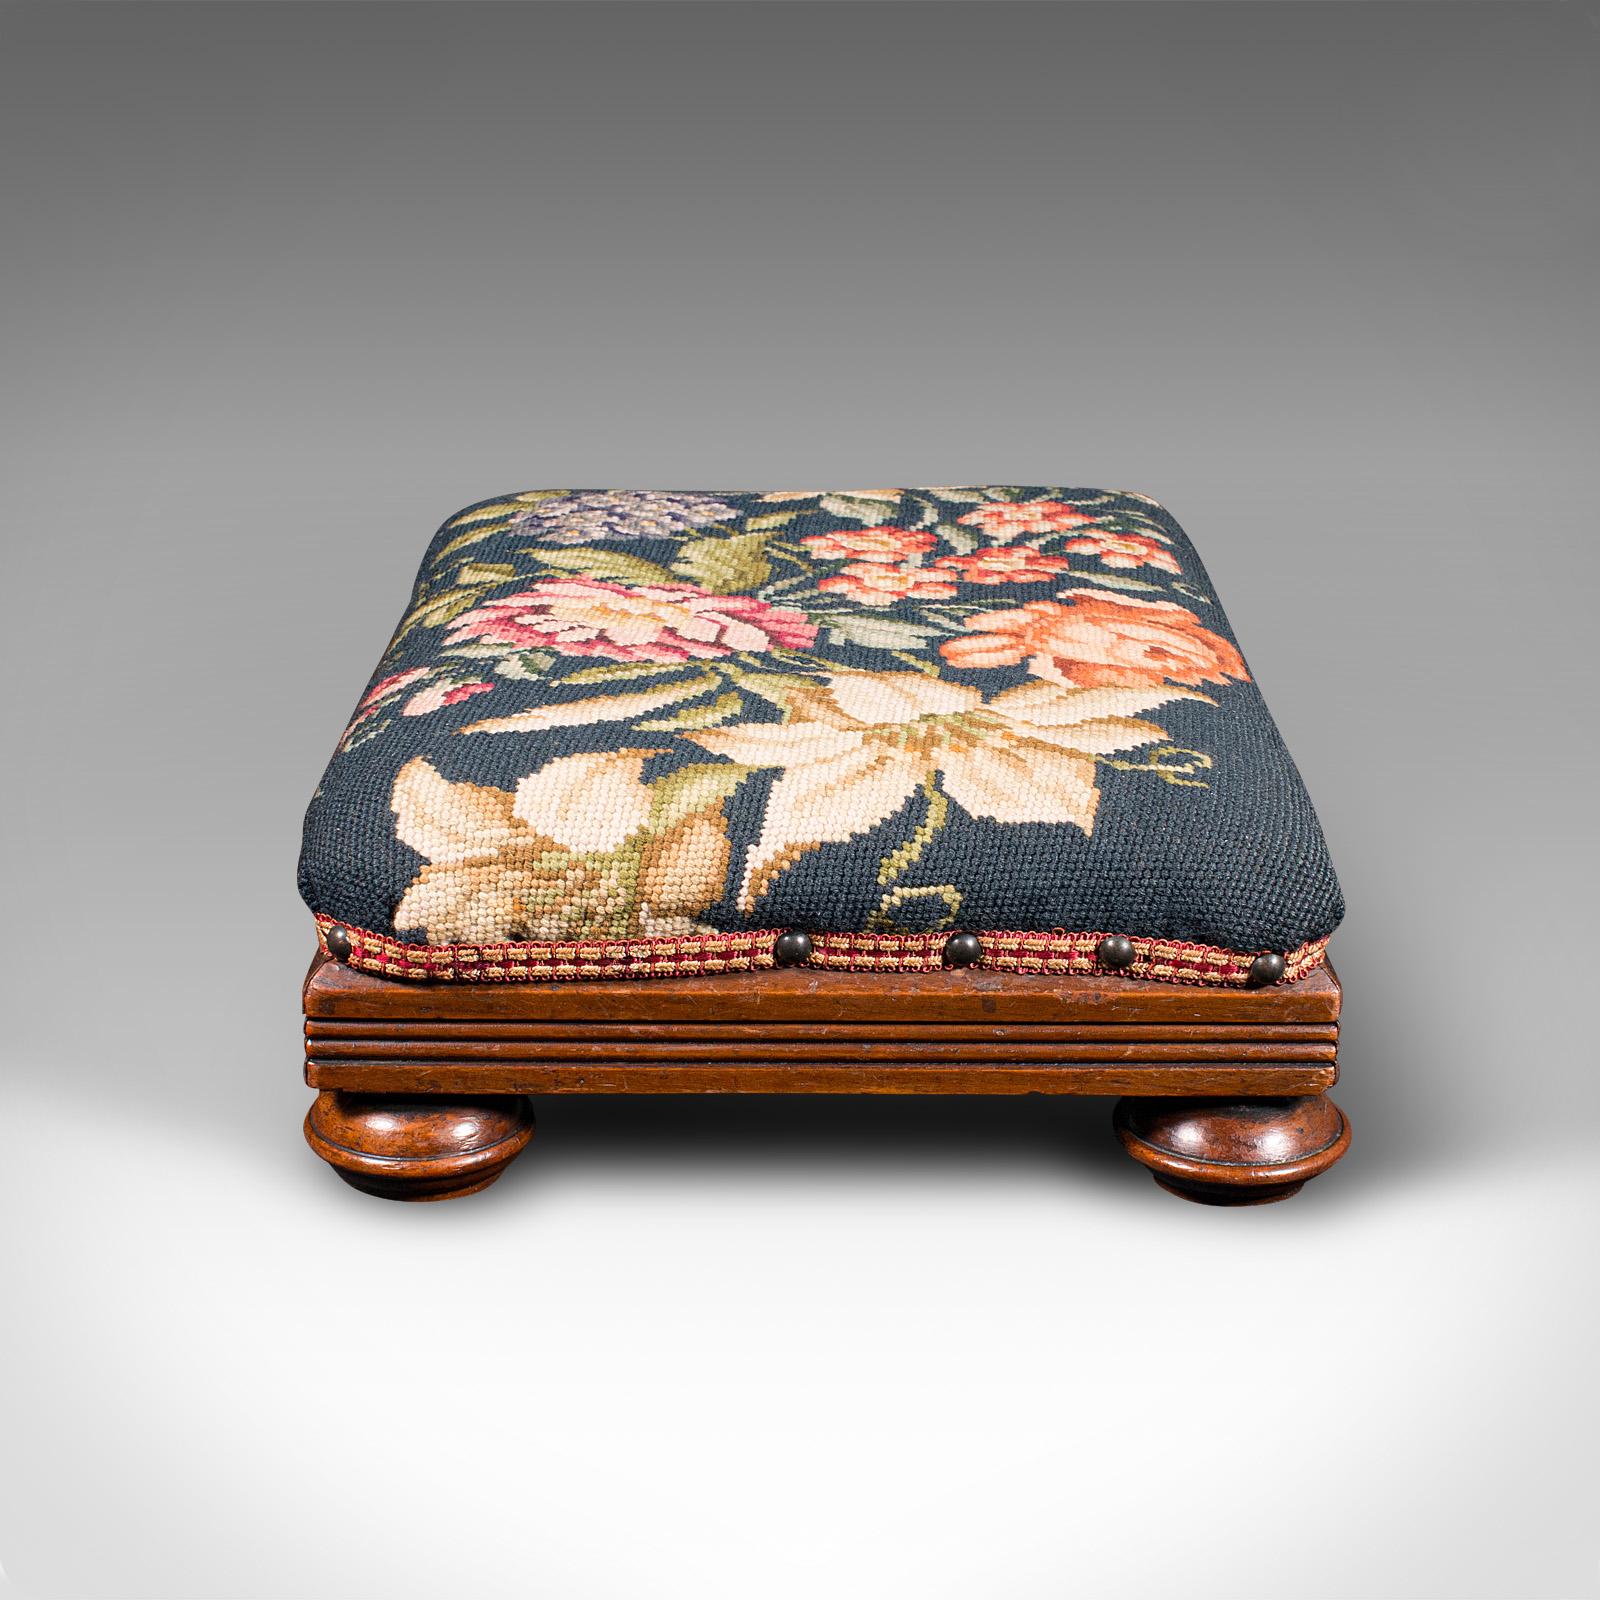 British Antique Footstool, English, Needlepoint, Fireside Footrest, Stool, Victorian For Sale